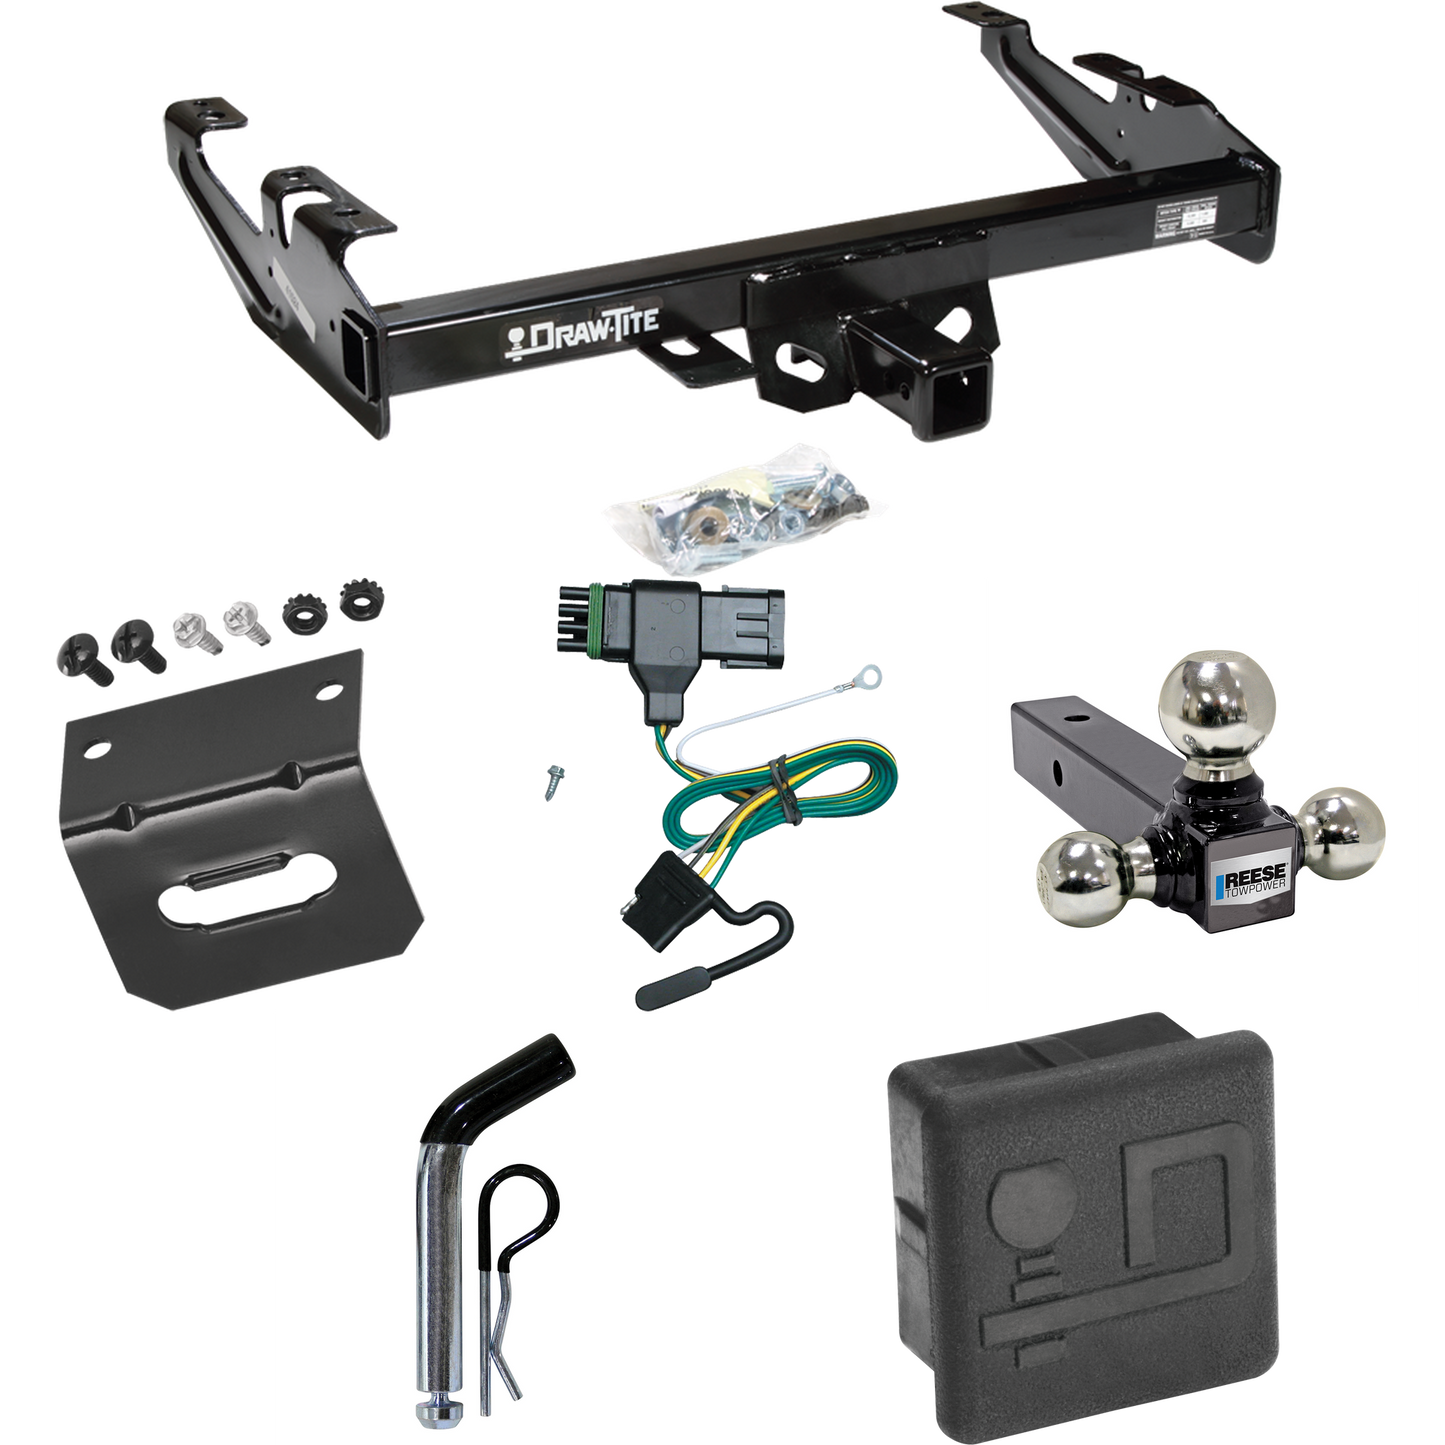 Fits 1988-1999 Chevrolet C2500 Trailer Hitch Tow PKG w/ 4-Flat Wiring + Triple Ball Ball Mount 1-7/8" & 2" & 2-5/16" Trailer Balls + Pin/Clip + Wiring Bracket + Hitch Cover (For Regular & Extended Cabs Models) By Draw-Tite